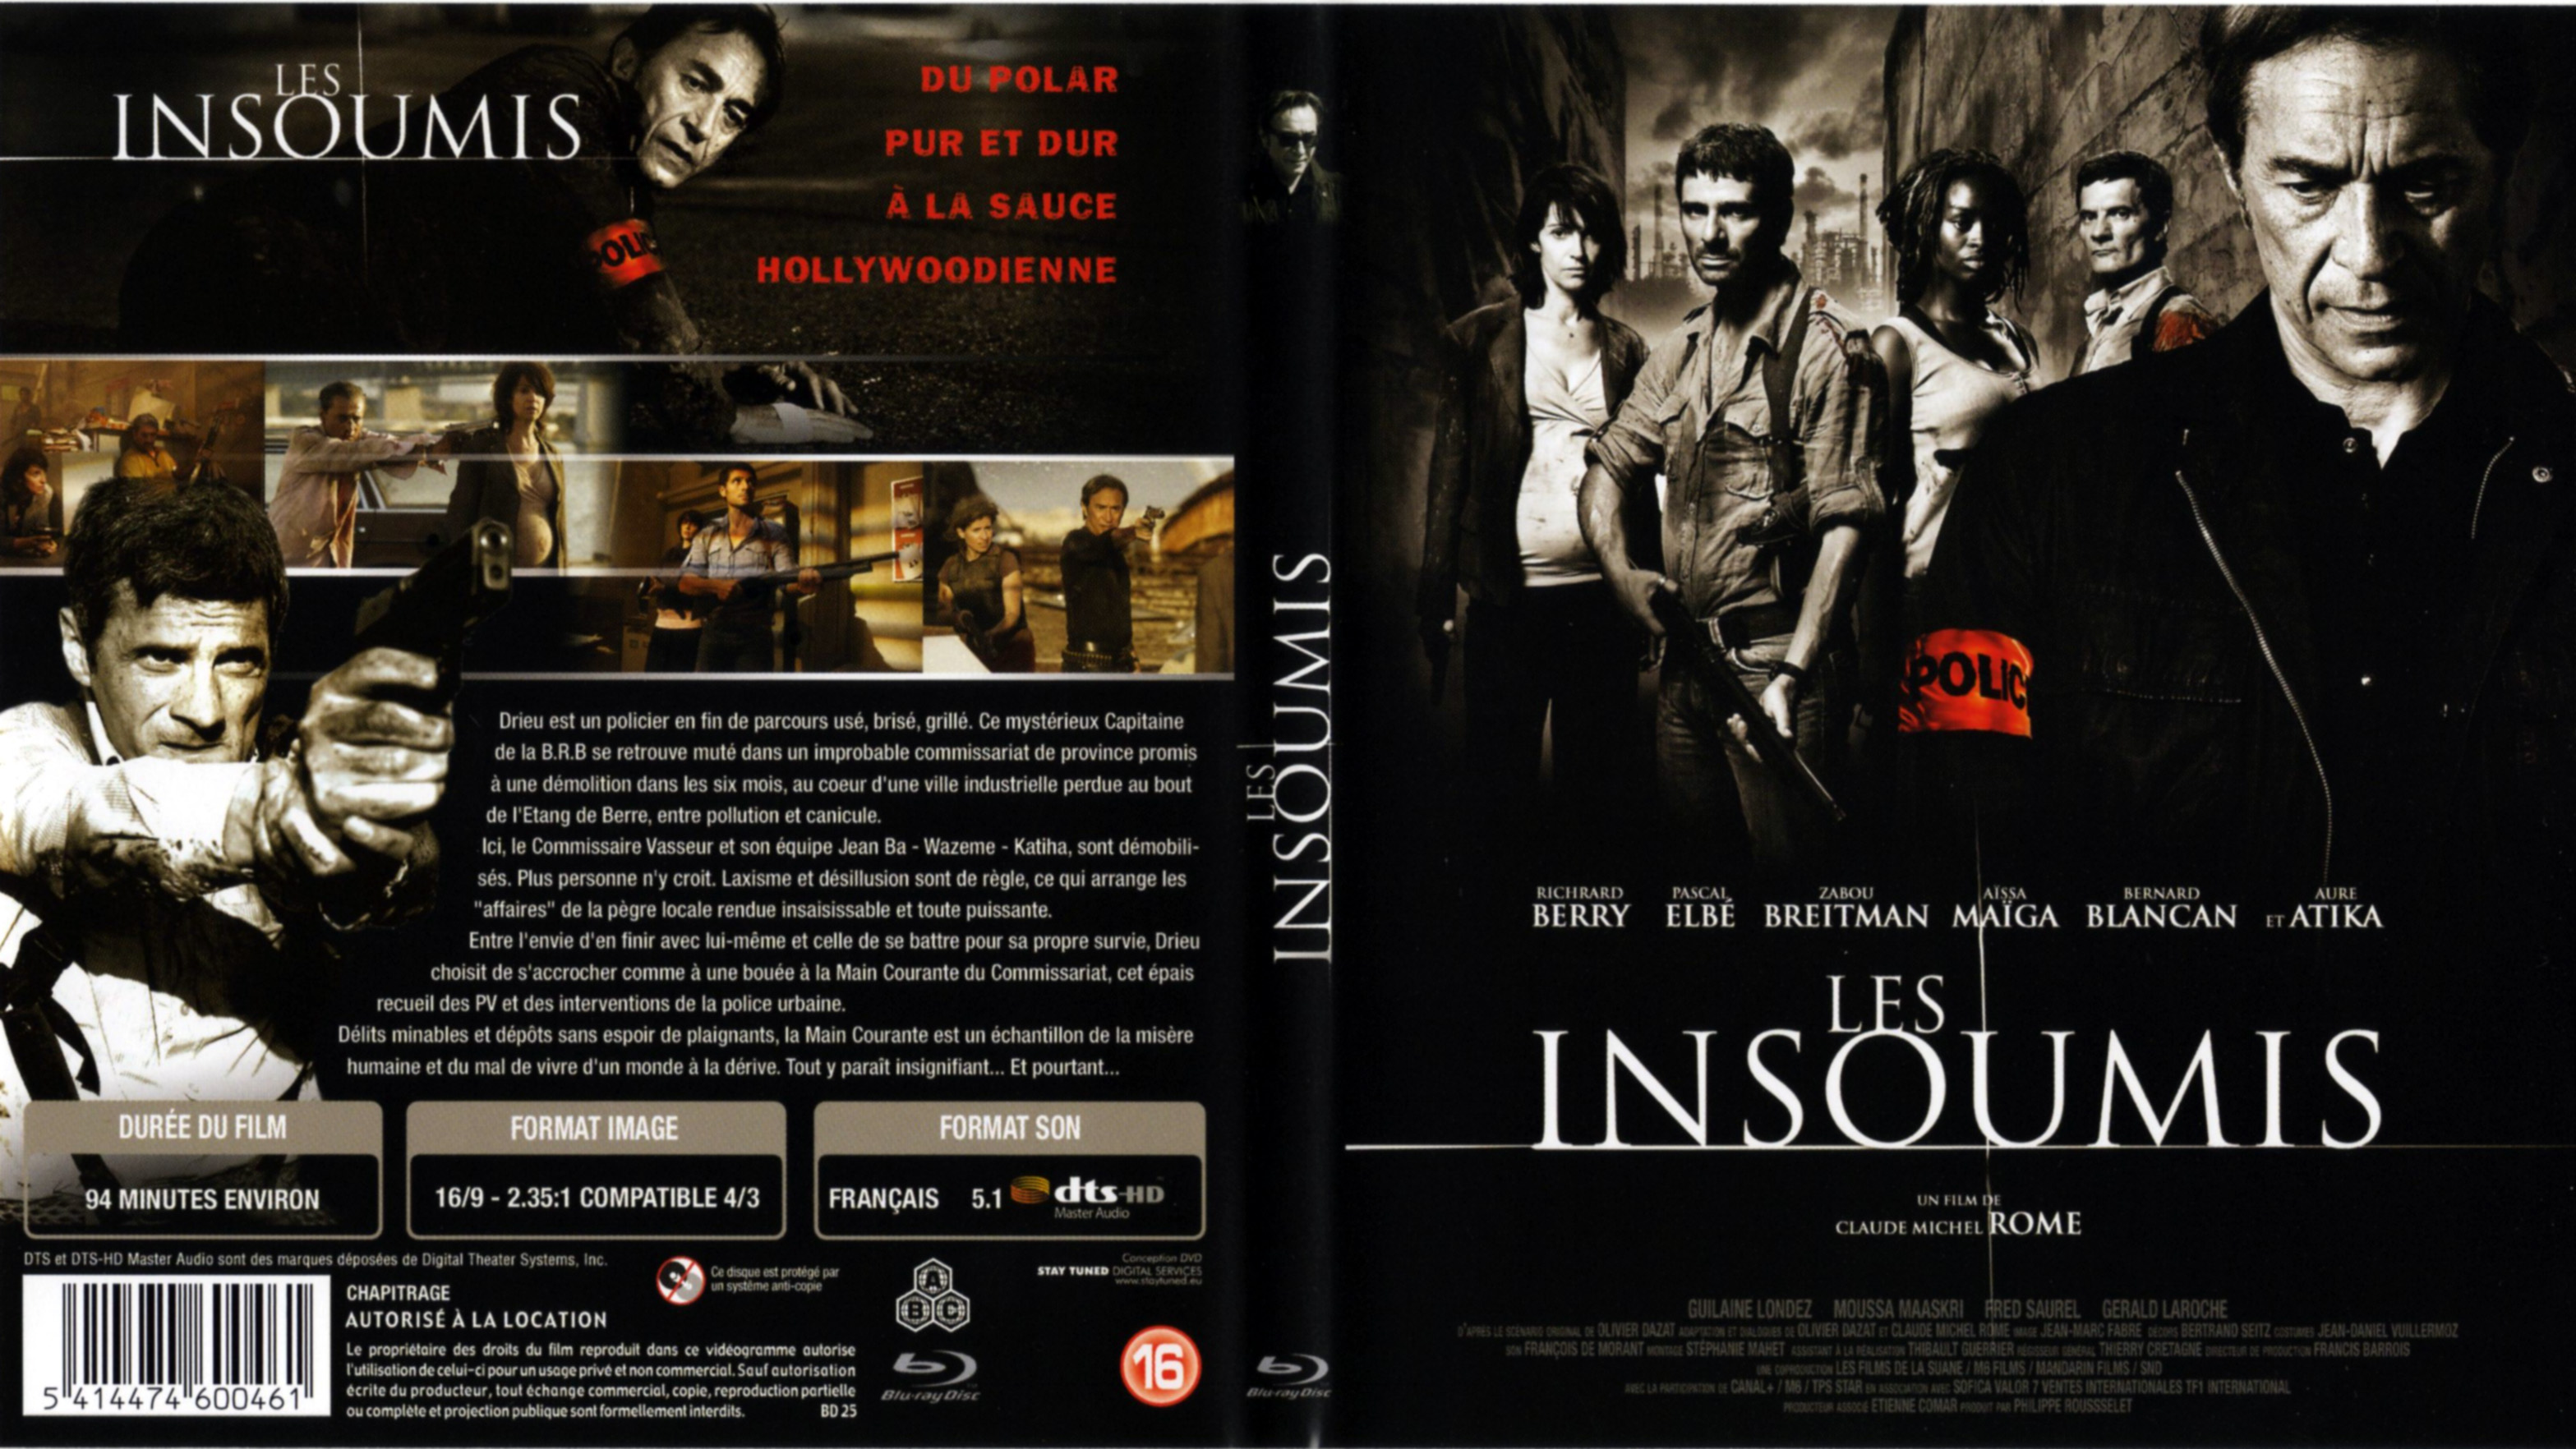 Jaquette DVD Les insoumis (BLU-RAY)